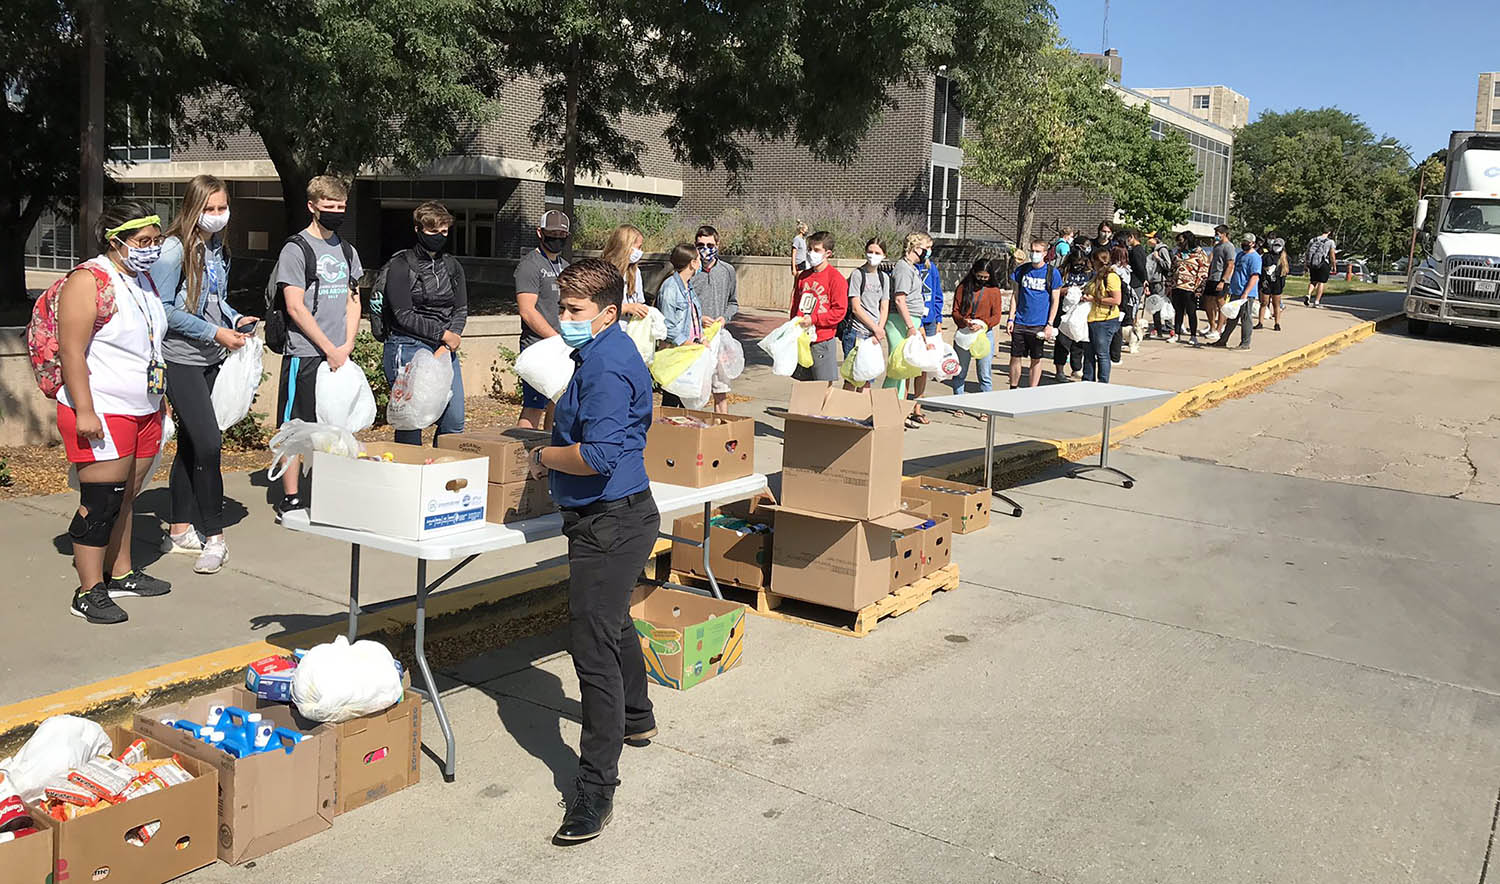 More than 340 students received fresh produce, dairy and meat Monday during a food giveaway on the UNK campus.